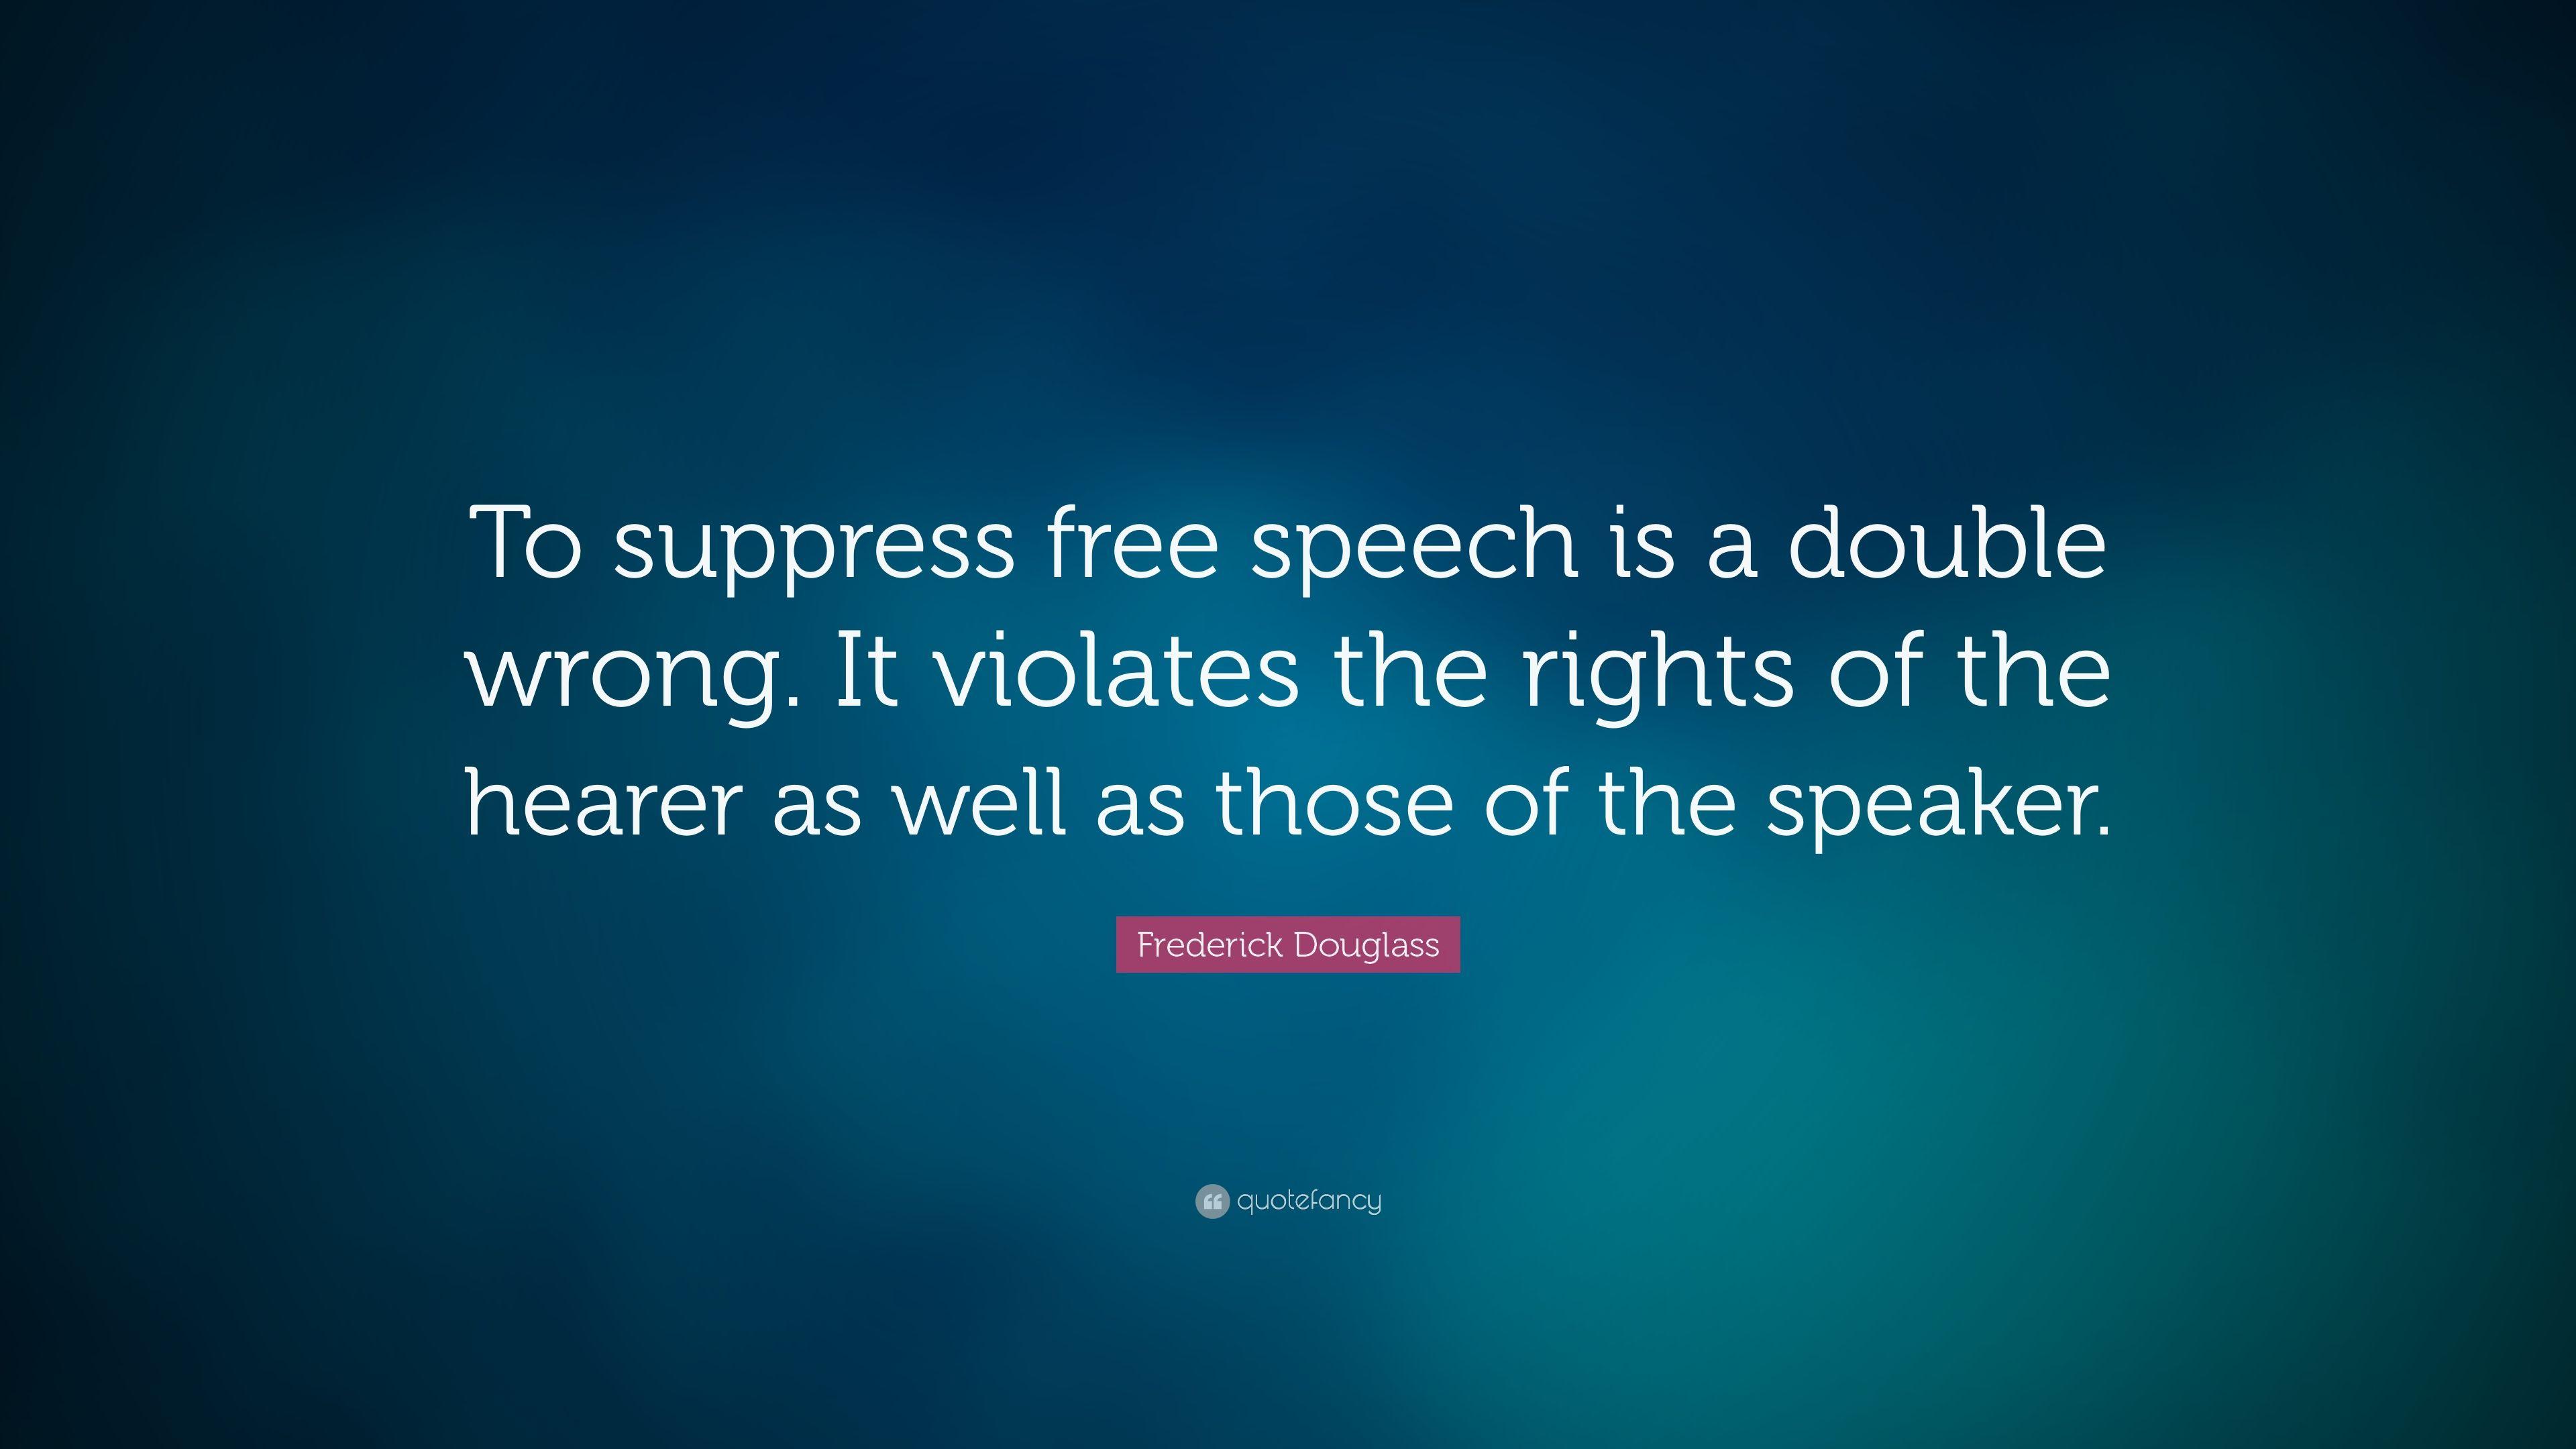 Frederick Douglass Quote: “To suppress free speech is a double